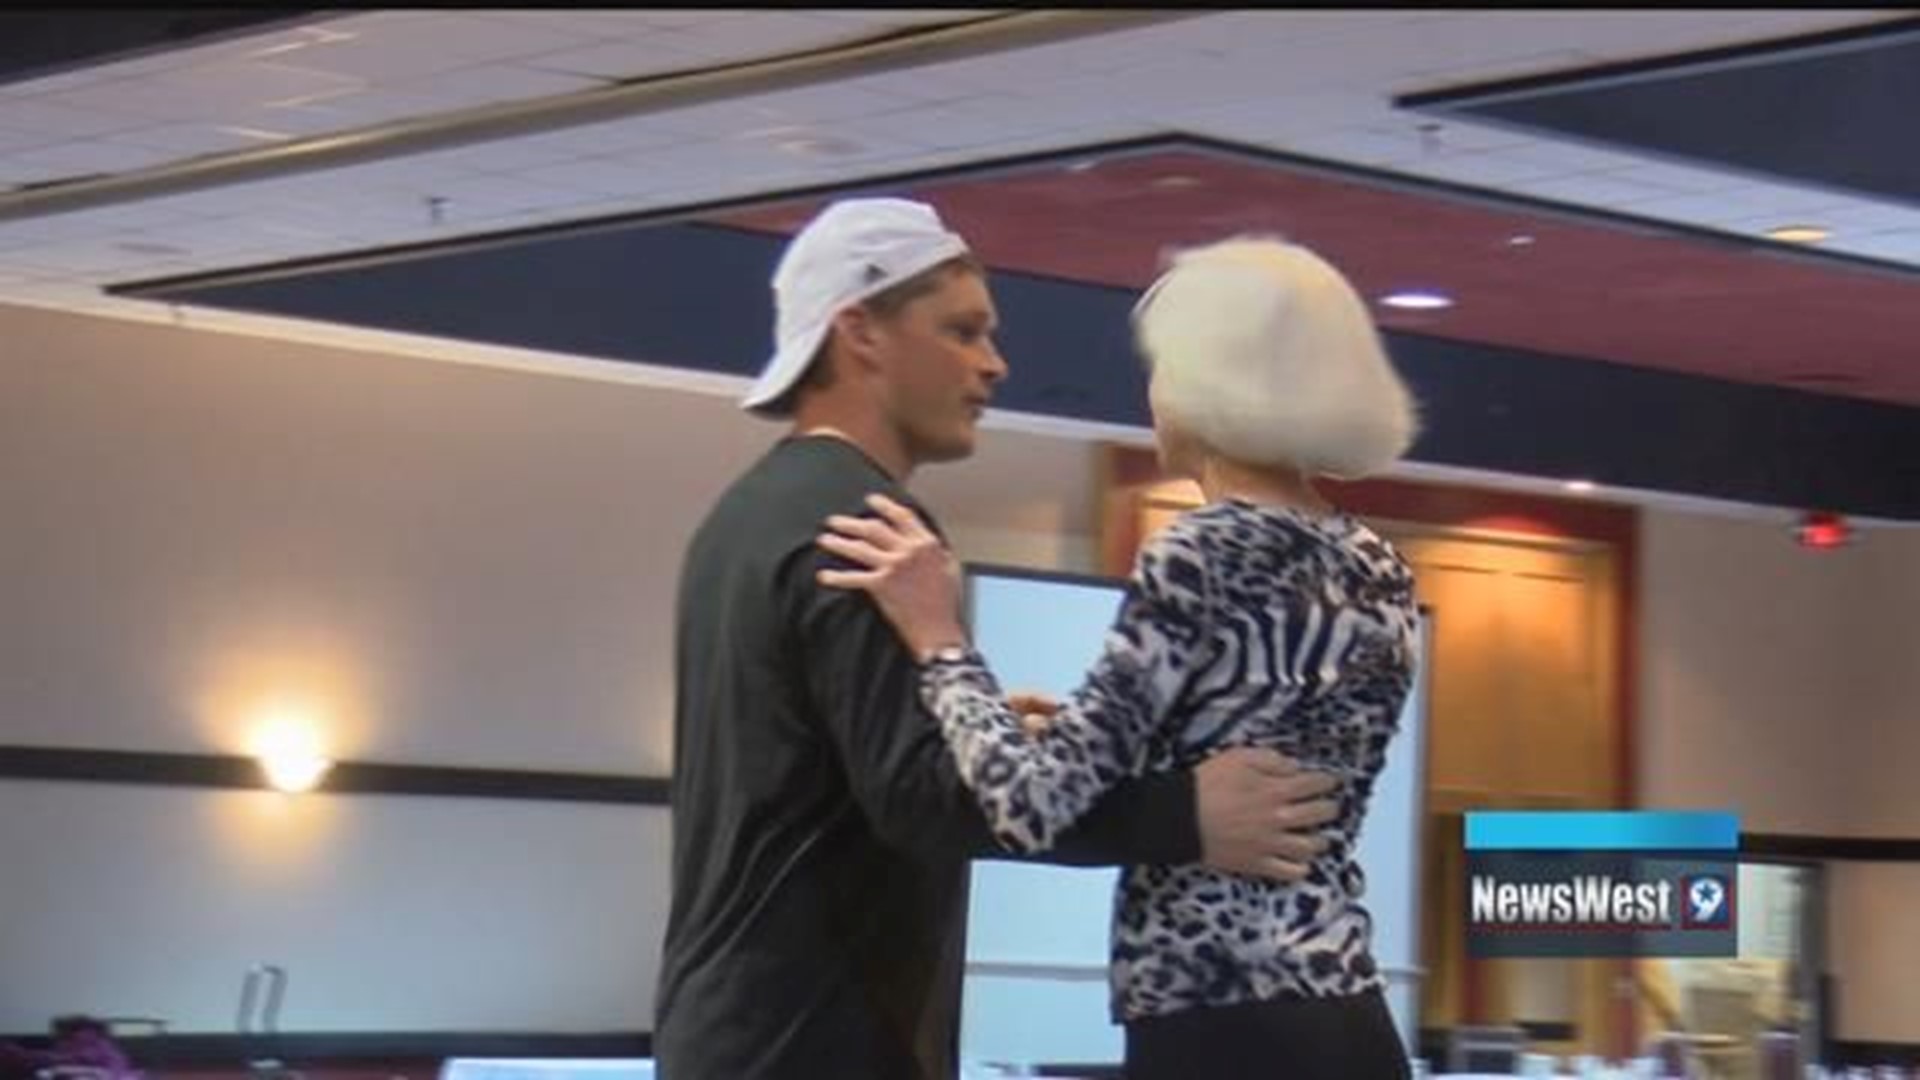 UTPB Football Coach Justin Carrigan participating in Dancing With West Texas Stars